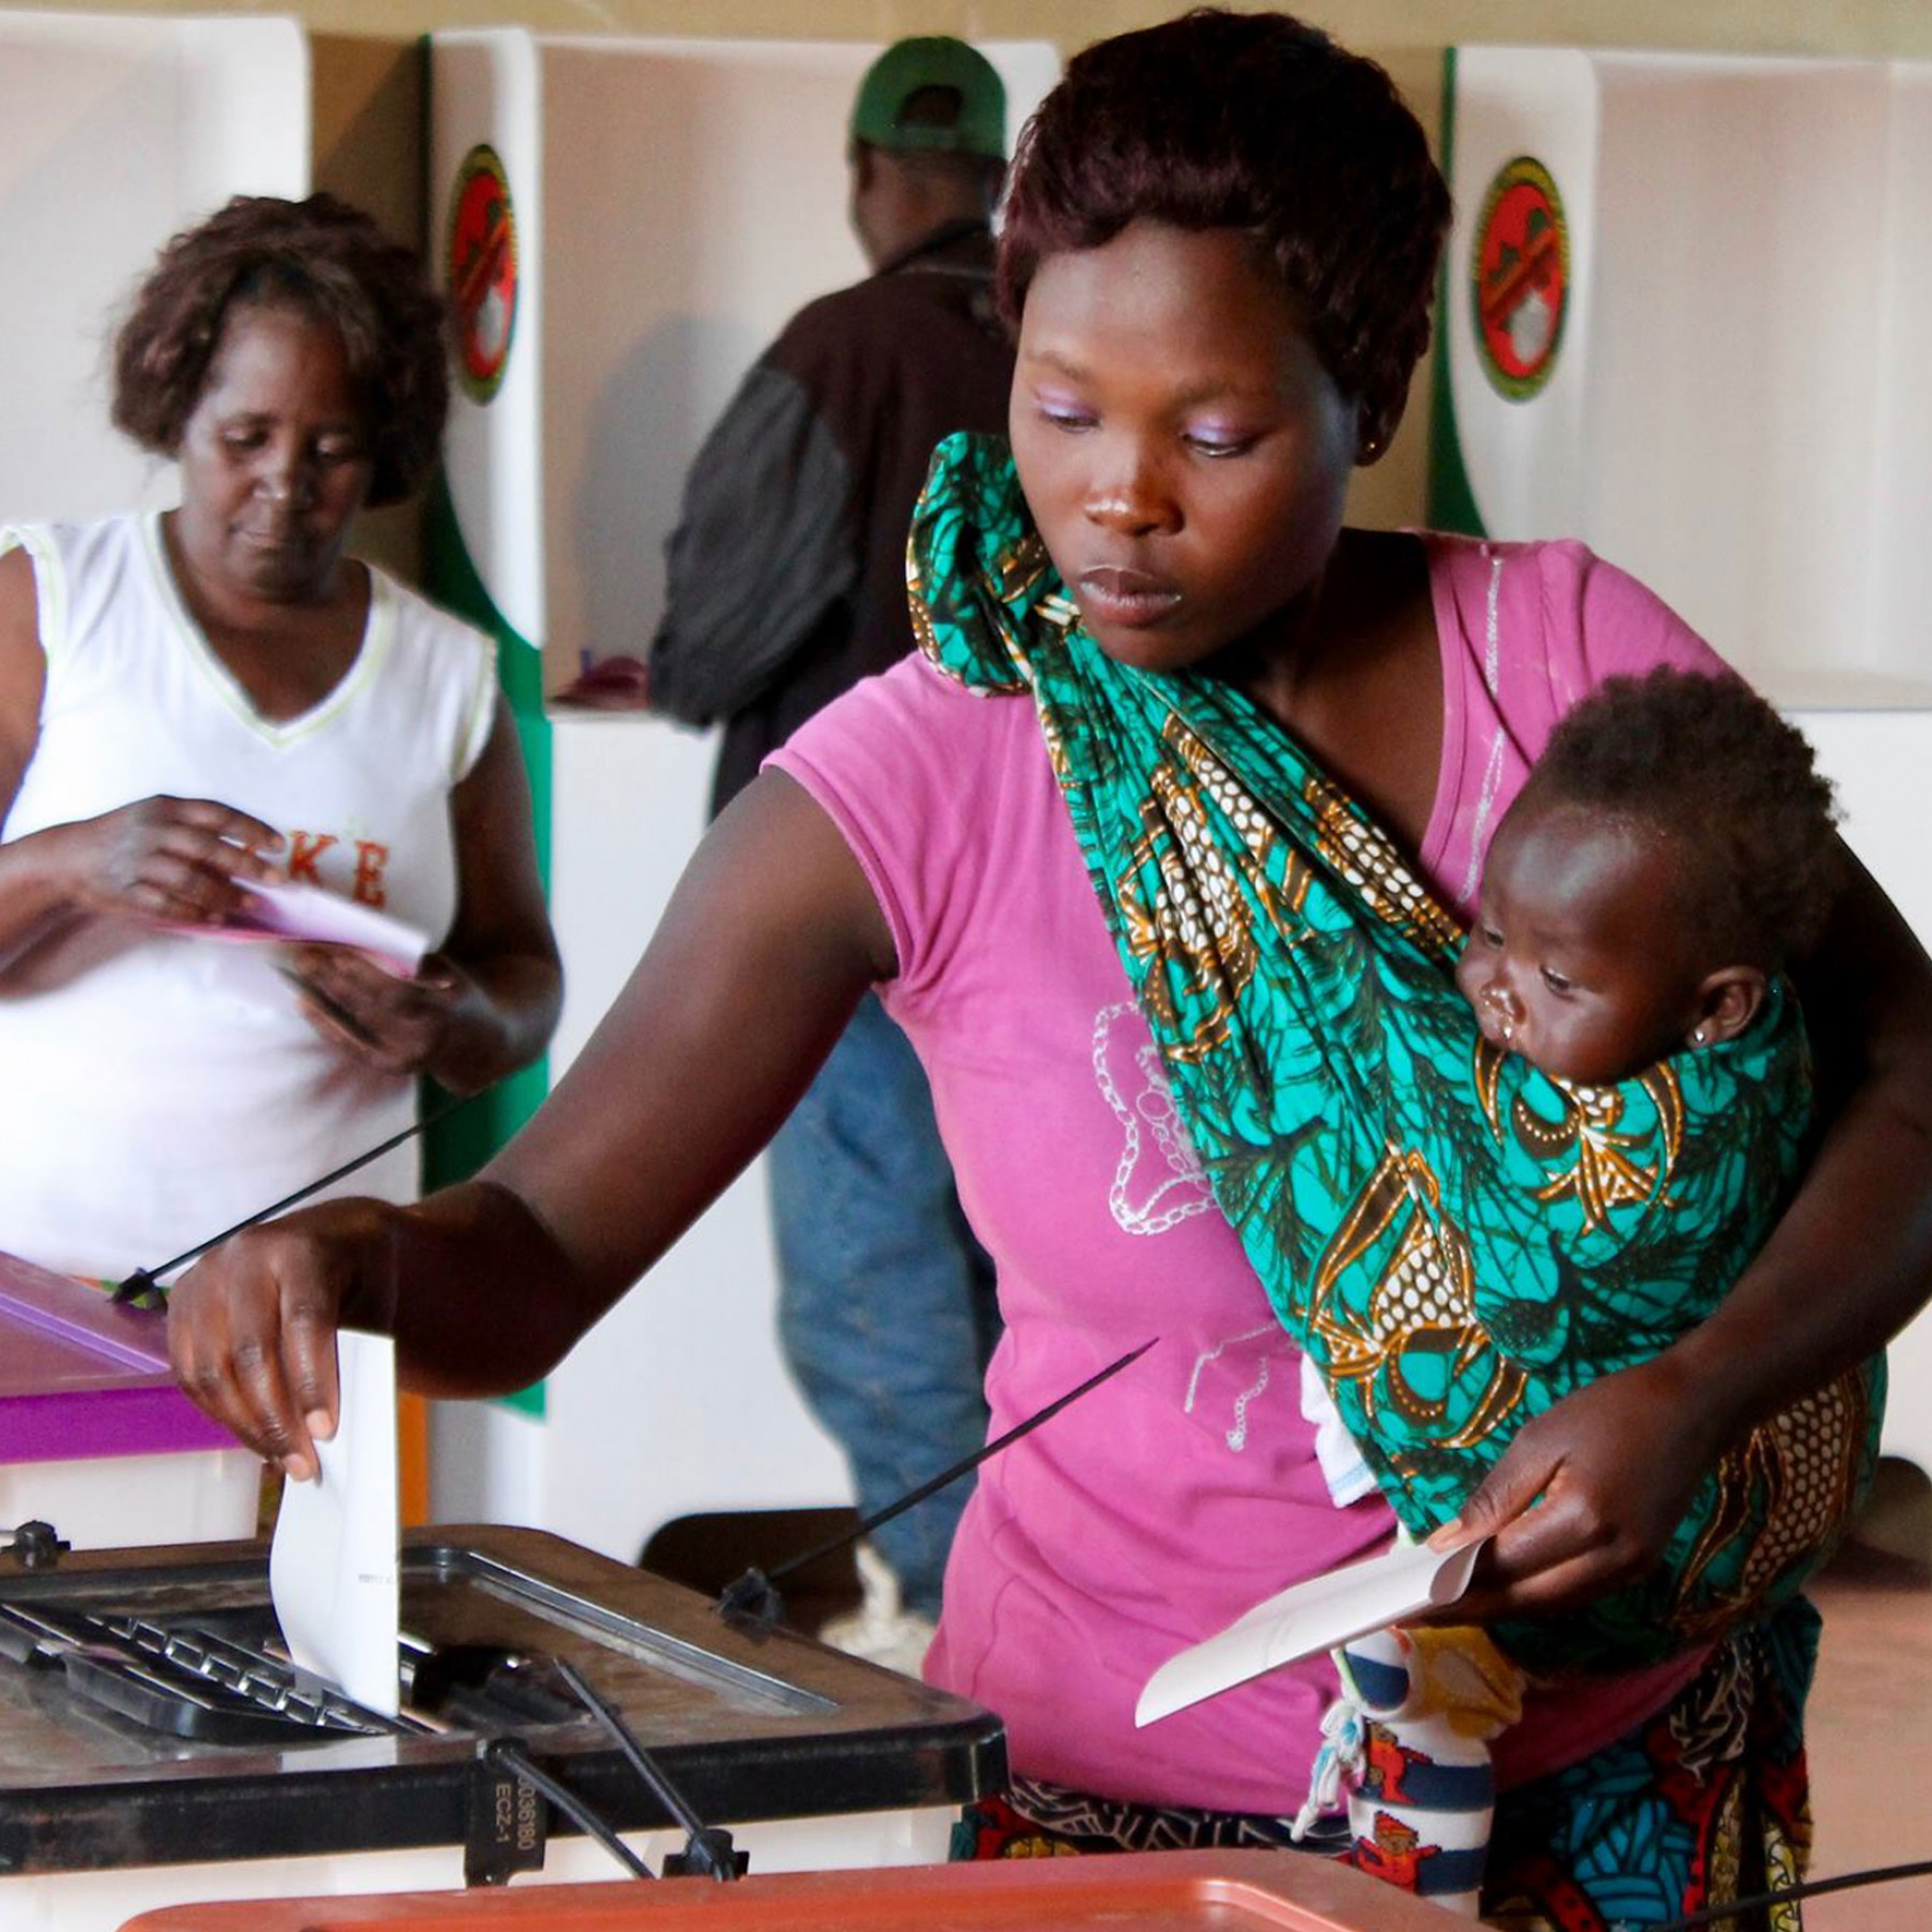 A Zambian mother casts her ballot at the Bauleni polling station on August 11, 2016 for the general elections.